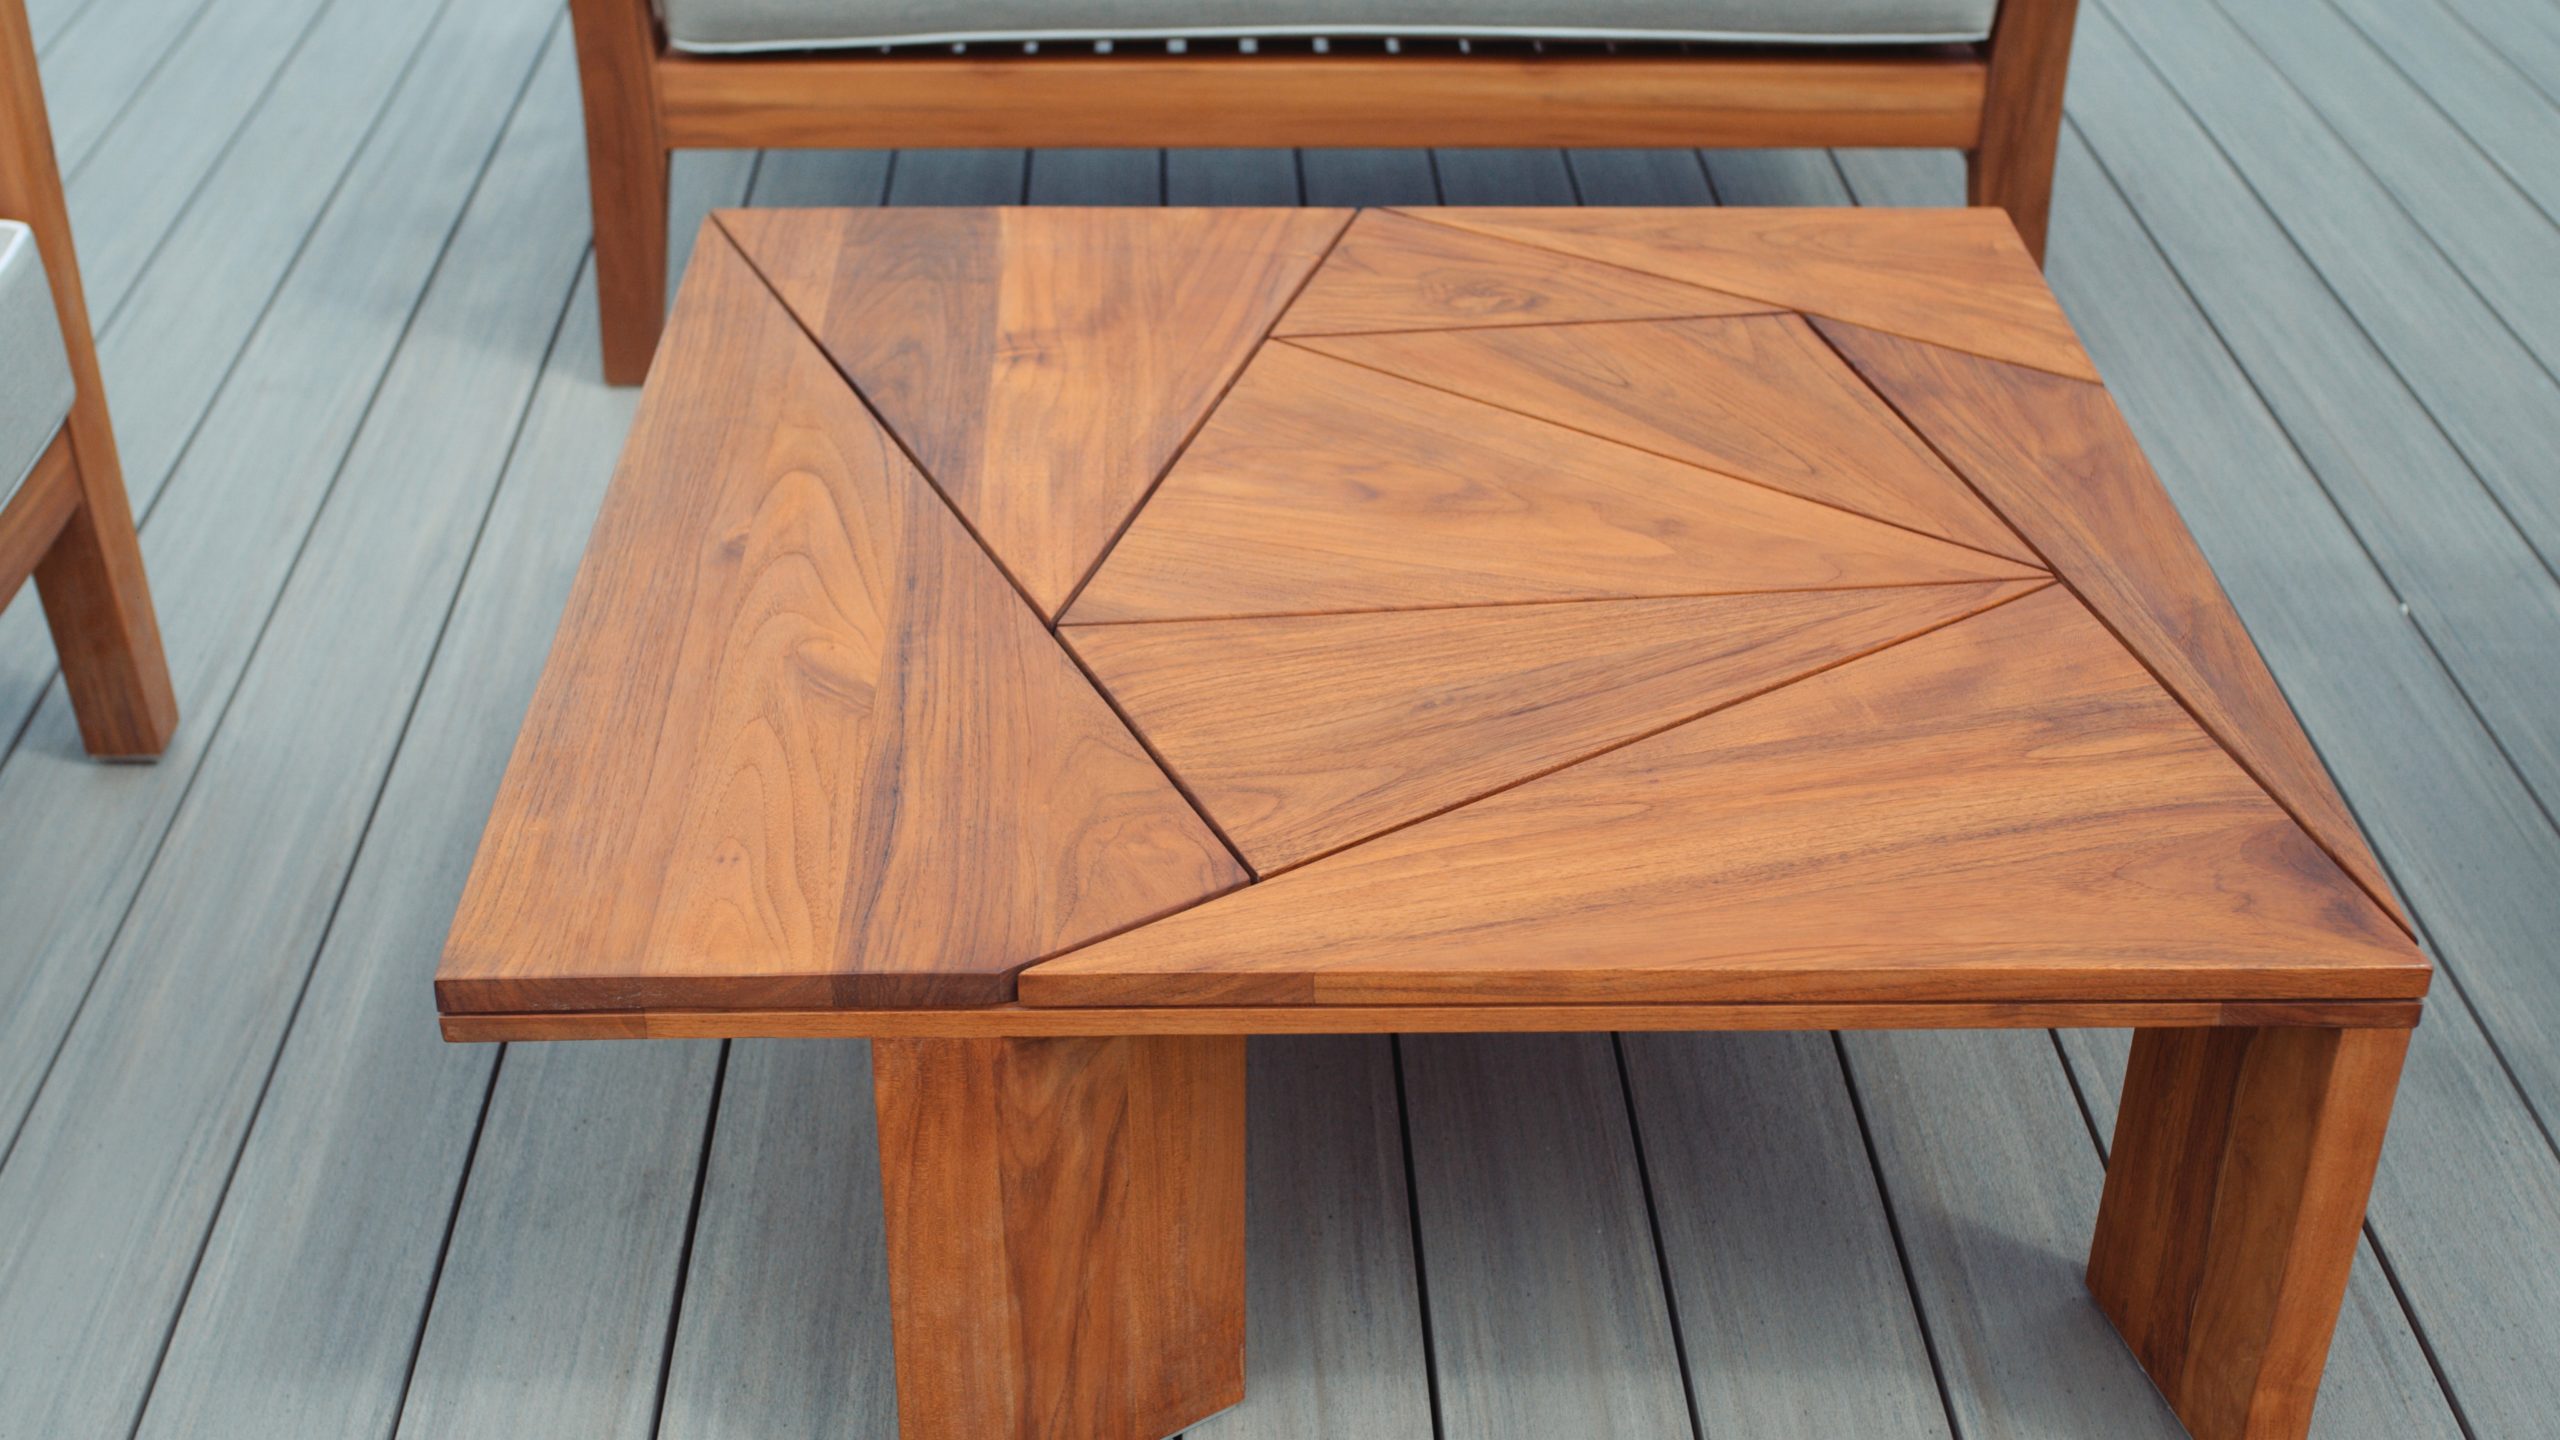 Closeup of a wooden table with chairs around it